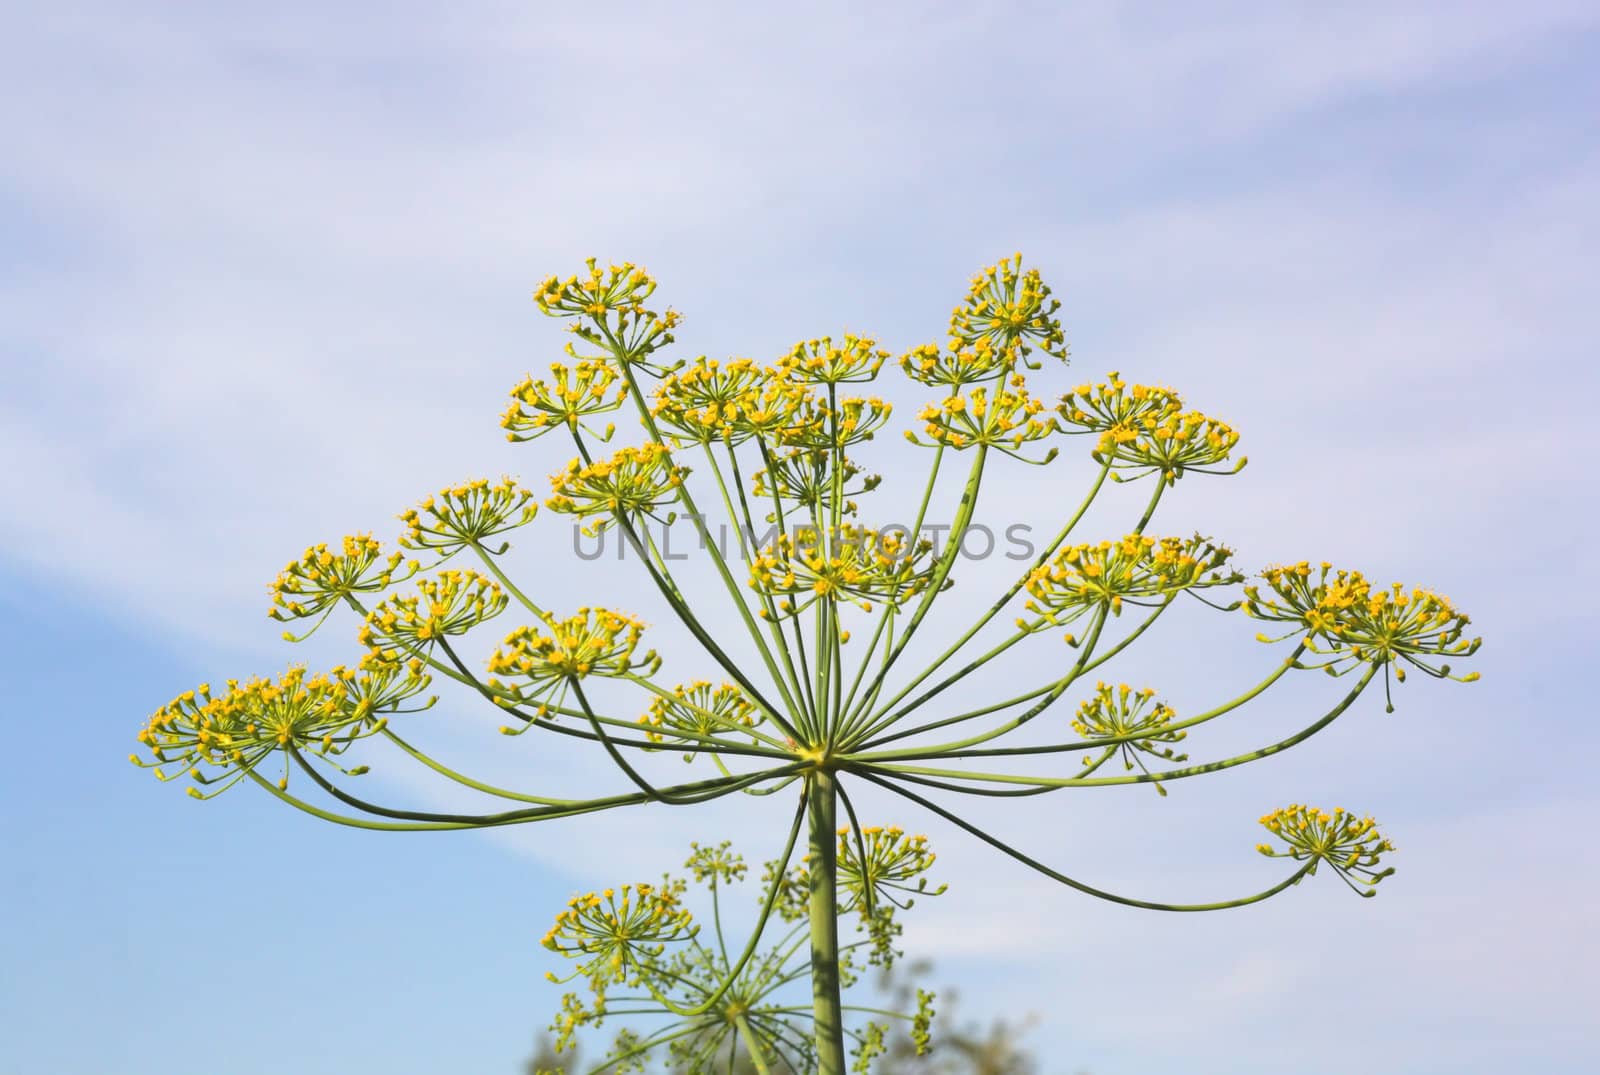 Fennel with blue sky on the background. by sergpet